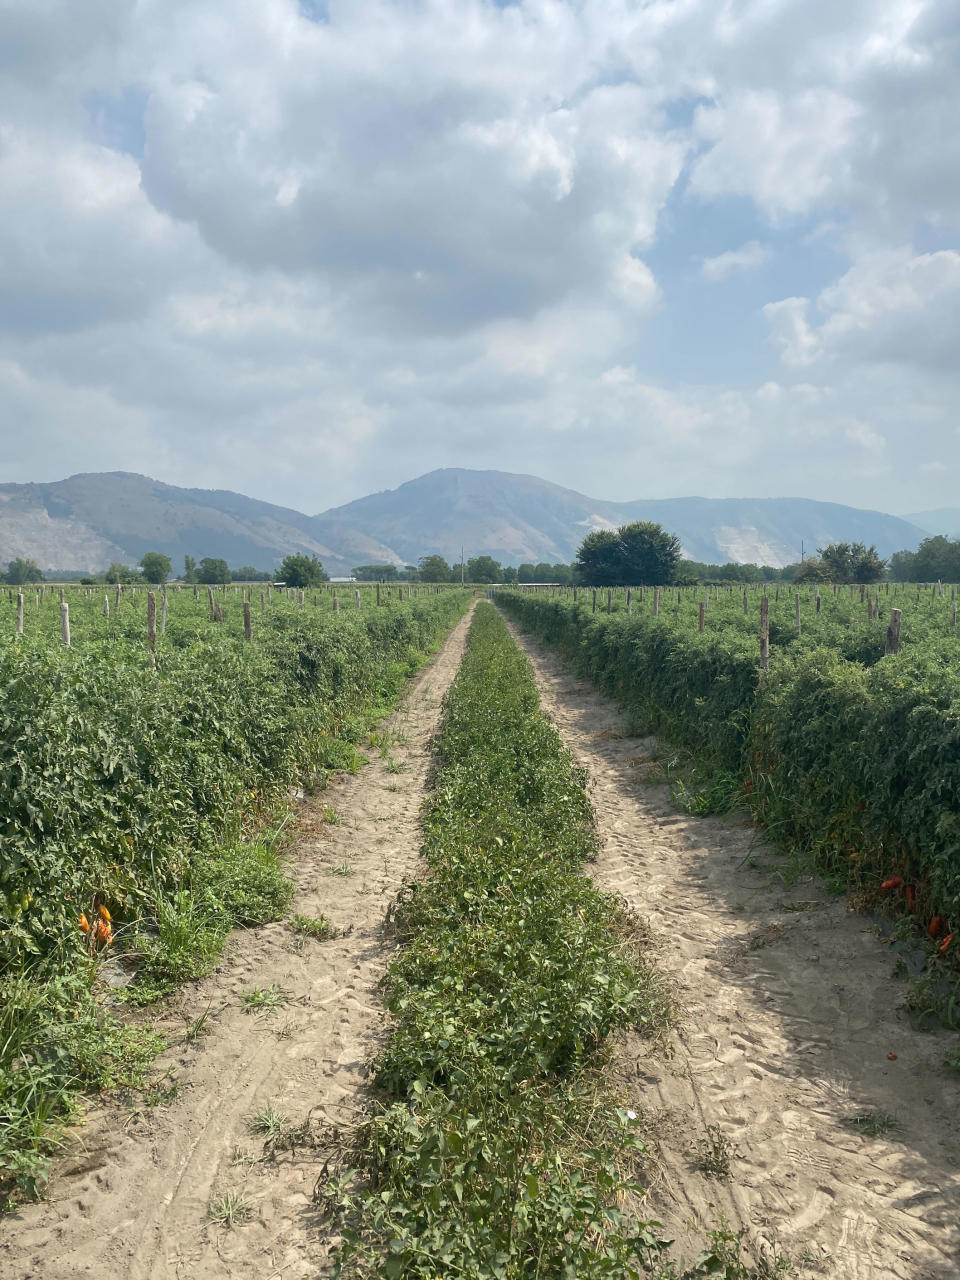 DOP San Marzano tomatoes are grown at the base of Mount Vesuvius. (Courtesy Anthony Contrino)